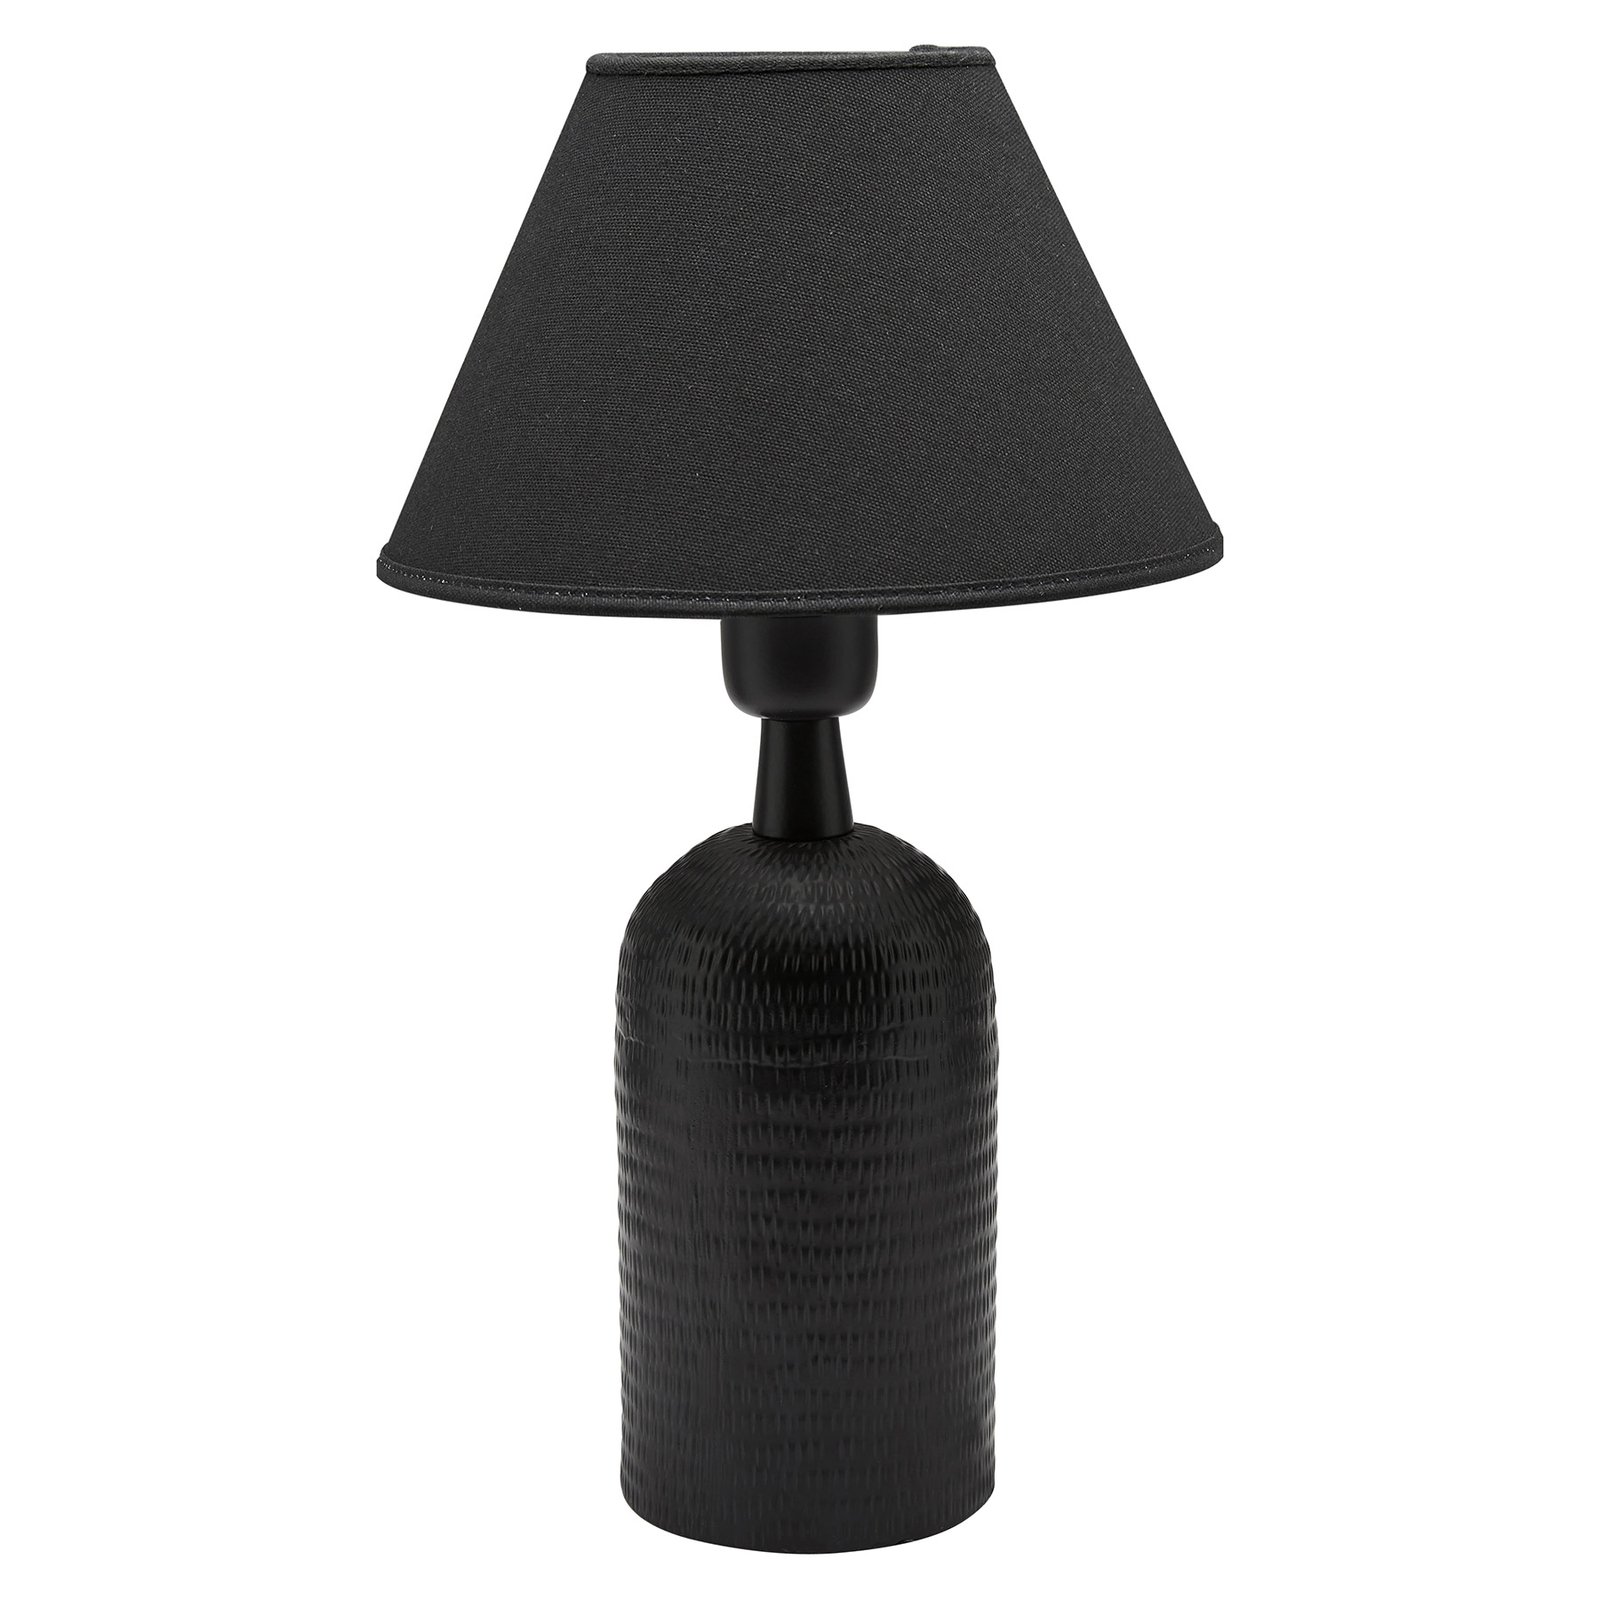 PR Home Riley table lamp, fabric lampshade, black